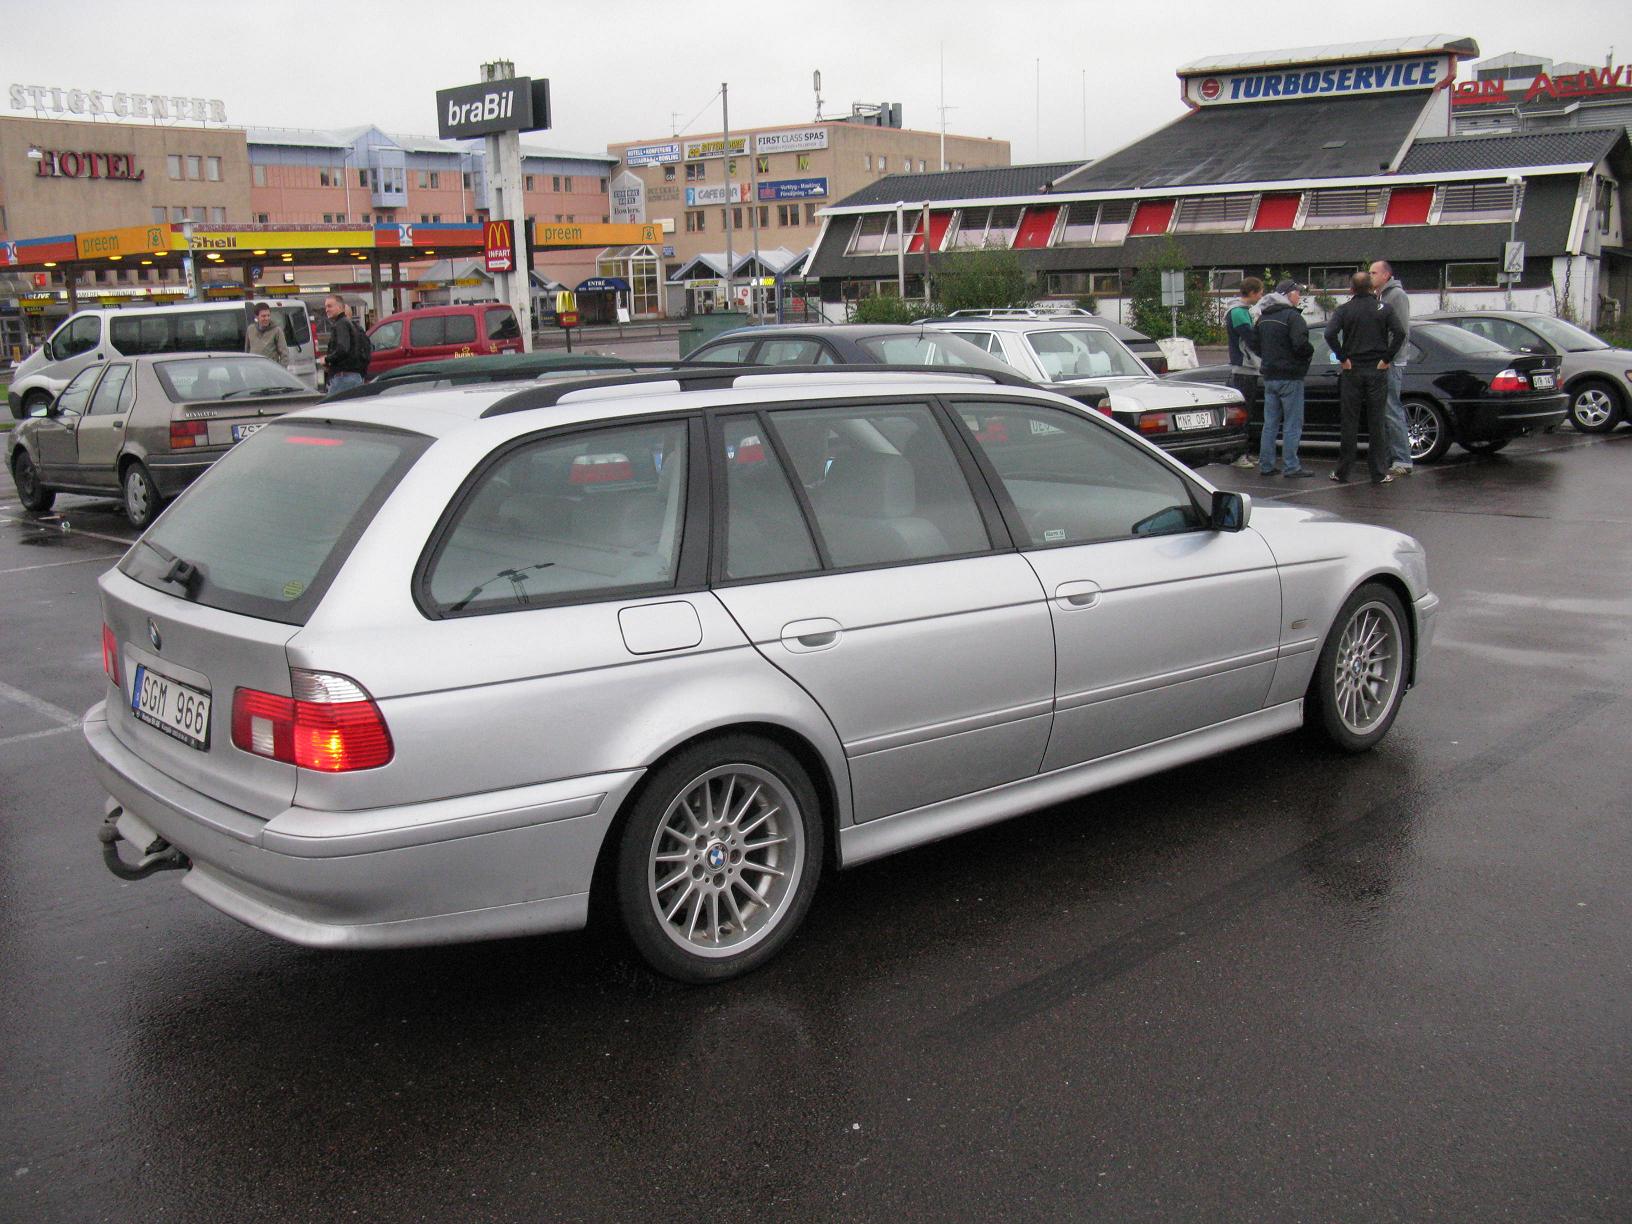 BMW 5 Series Touring E39 | Flickr - Photo Sharing!